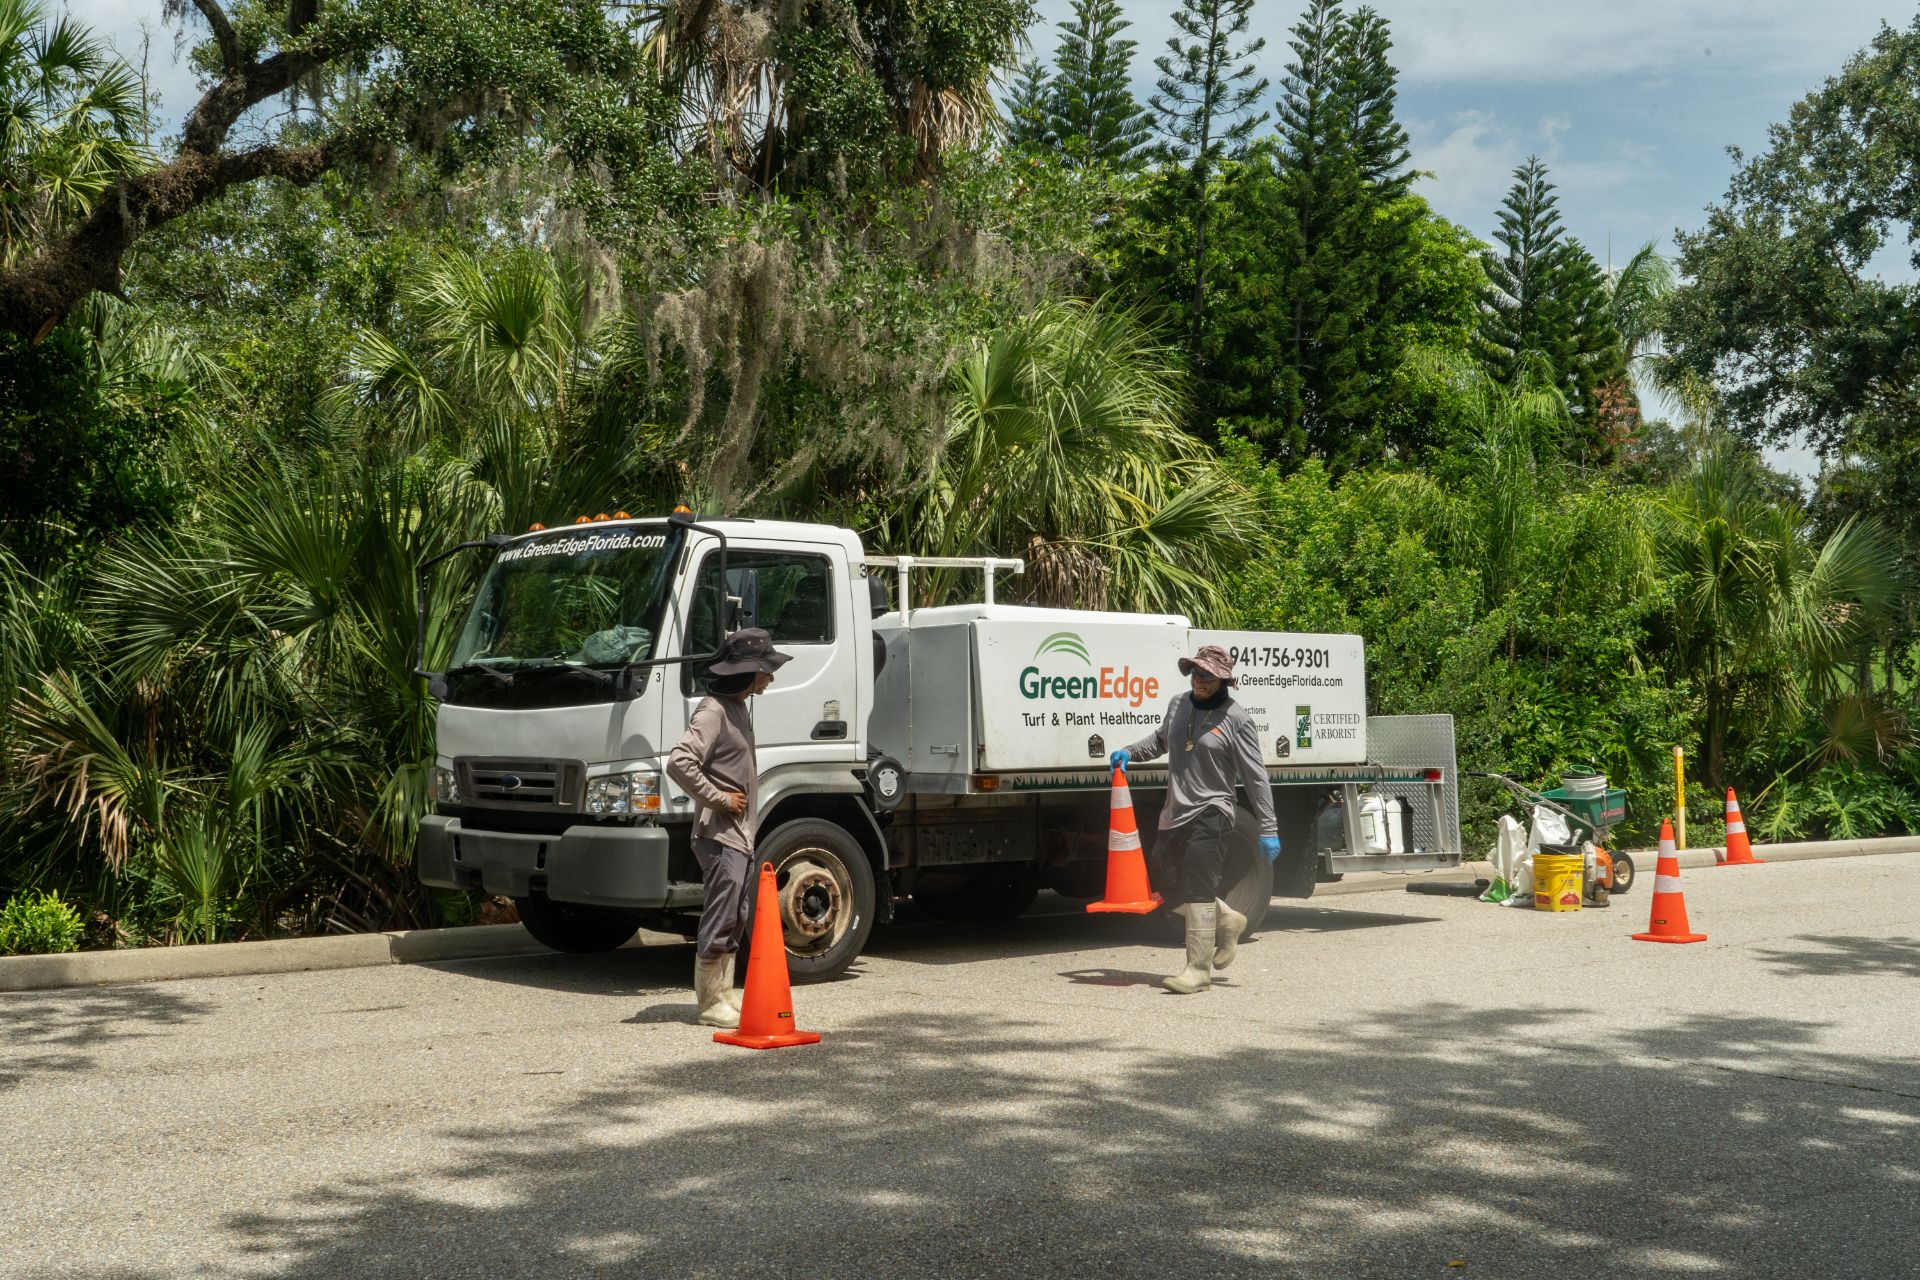 Two GreenEdge staff members diligently placing traffic cones on the road in Sarasota. Our dedicated team prioritizes safety and takes necessary precautions during landscaping and maintenance activities. Trust GreenEdge for a professional and responsible approach to ensure the well-being of both our staff and the public.